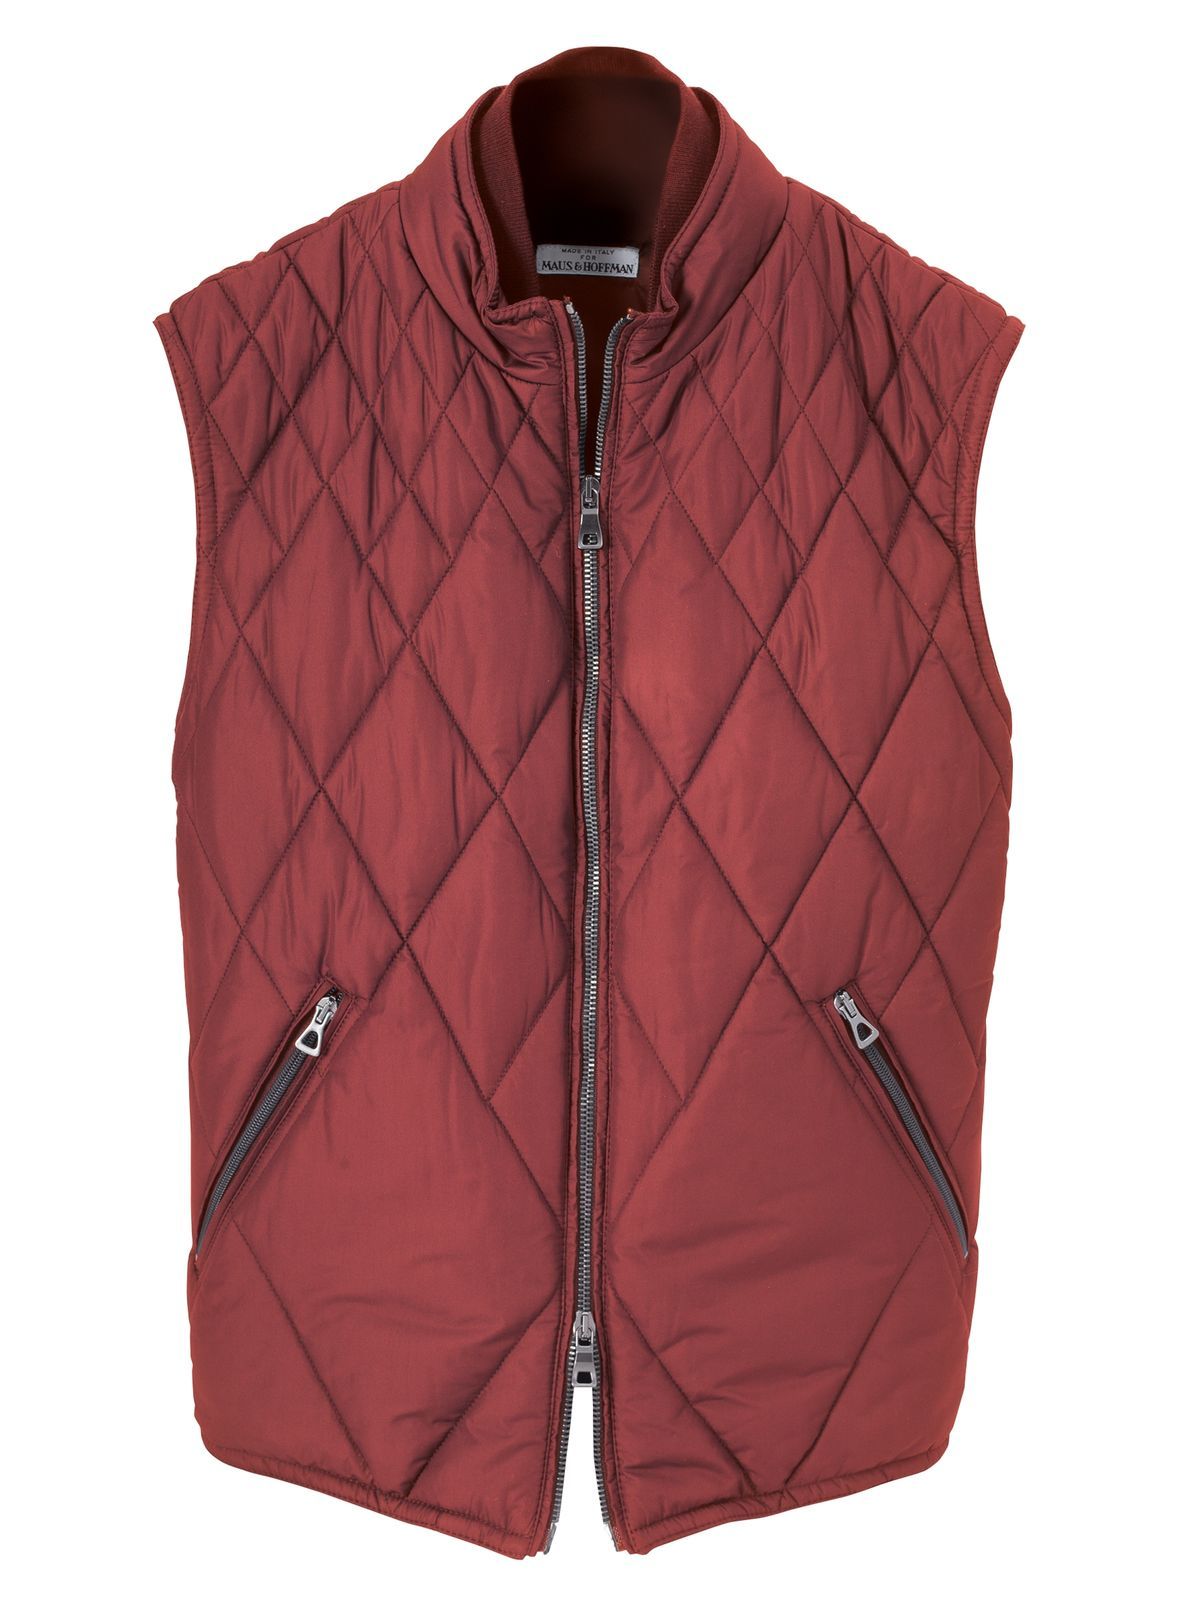 Diamante Quilted Vests - 3 Colors